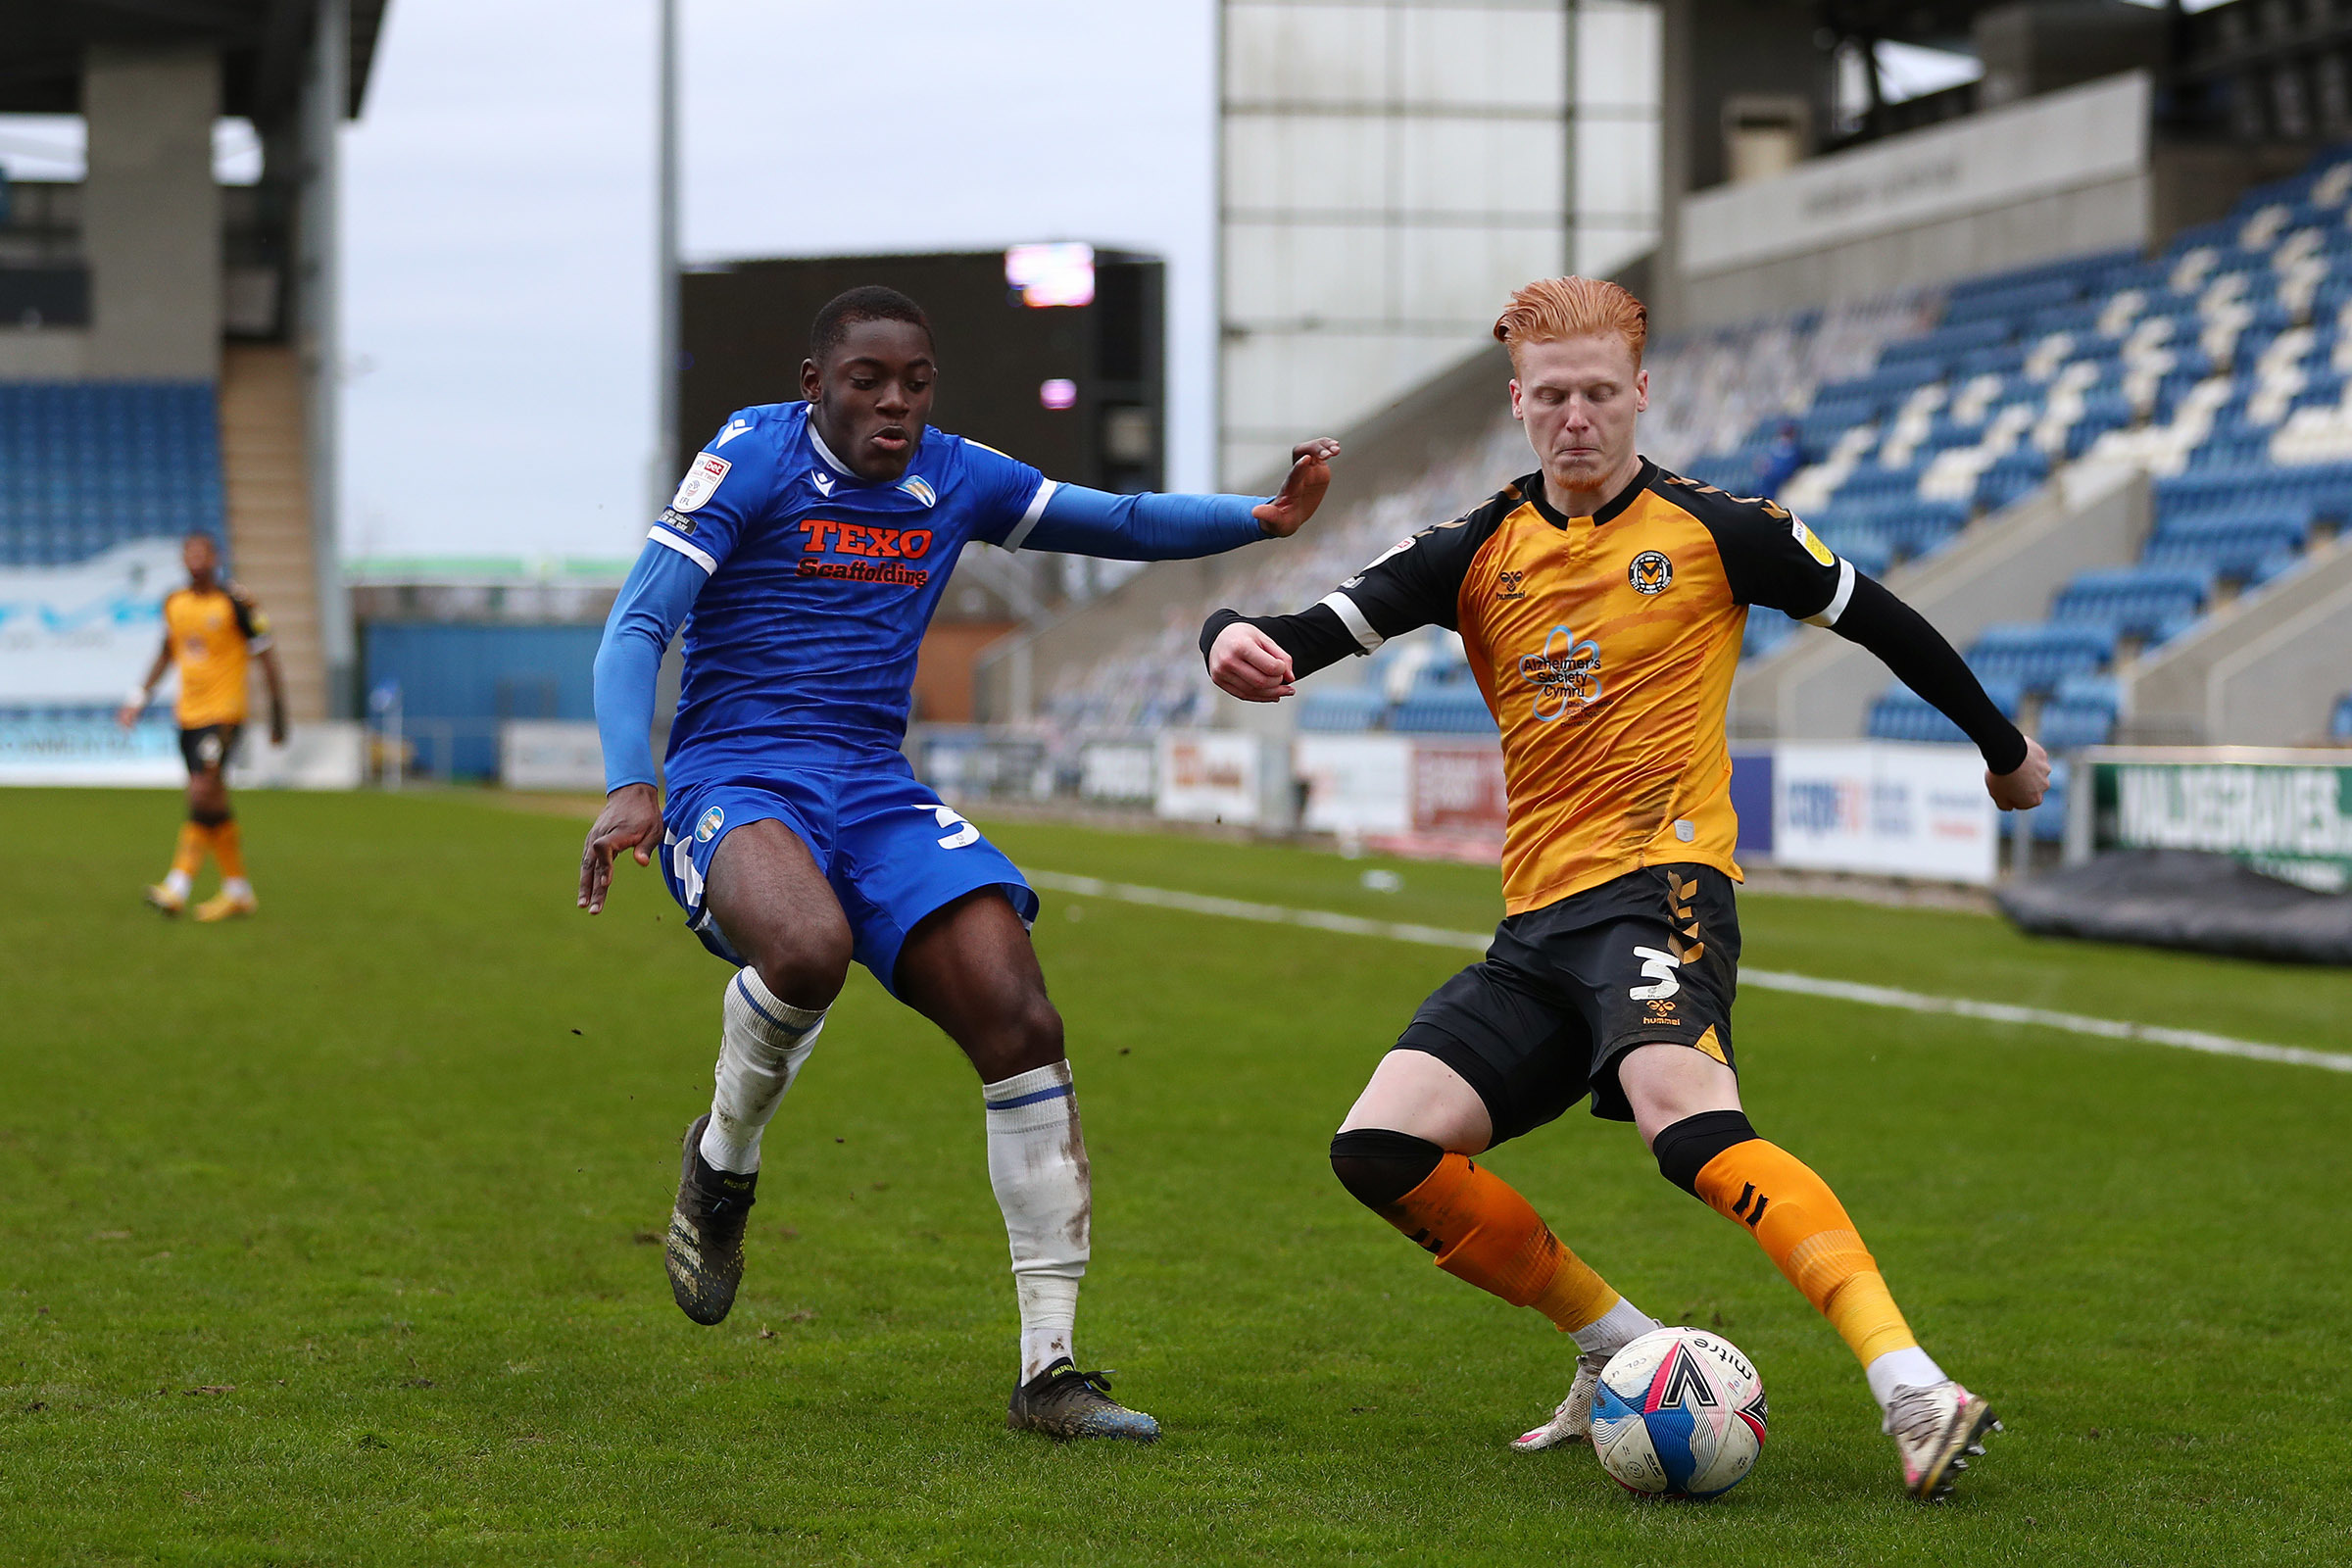 06.03.21 - Colchester United v Newport County - Sky Bet League 2 - Ryan Haynes of Newport County and Junior Tchamadeu of Colchester United